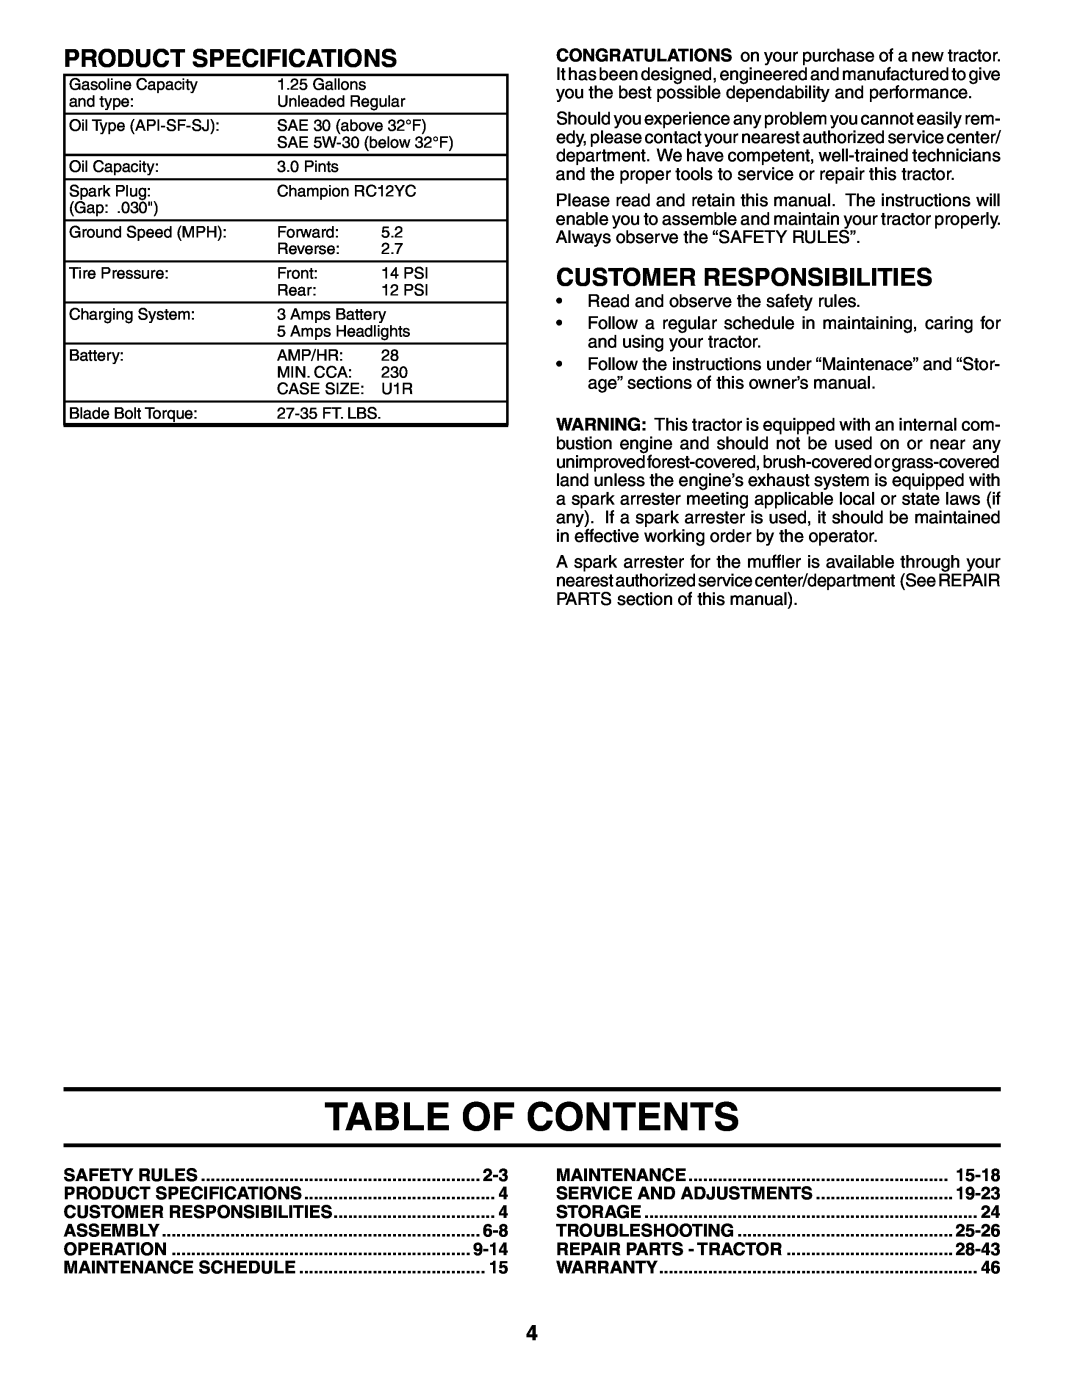 Poulan 187301 manual Table Of Contents, Product Specifications, Customer Responsibilities 